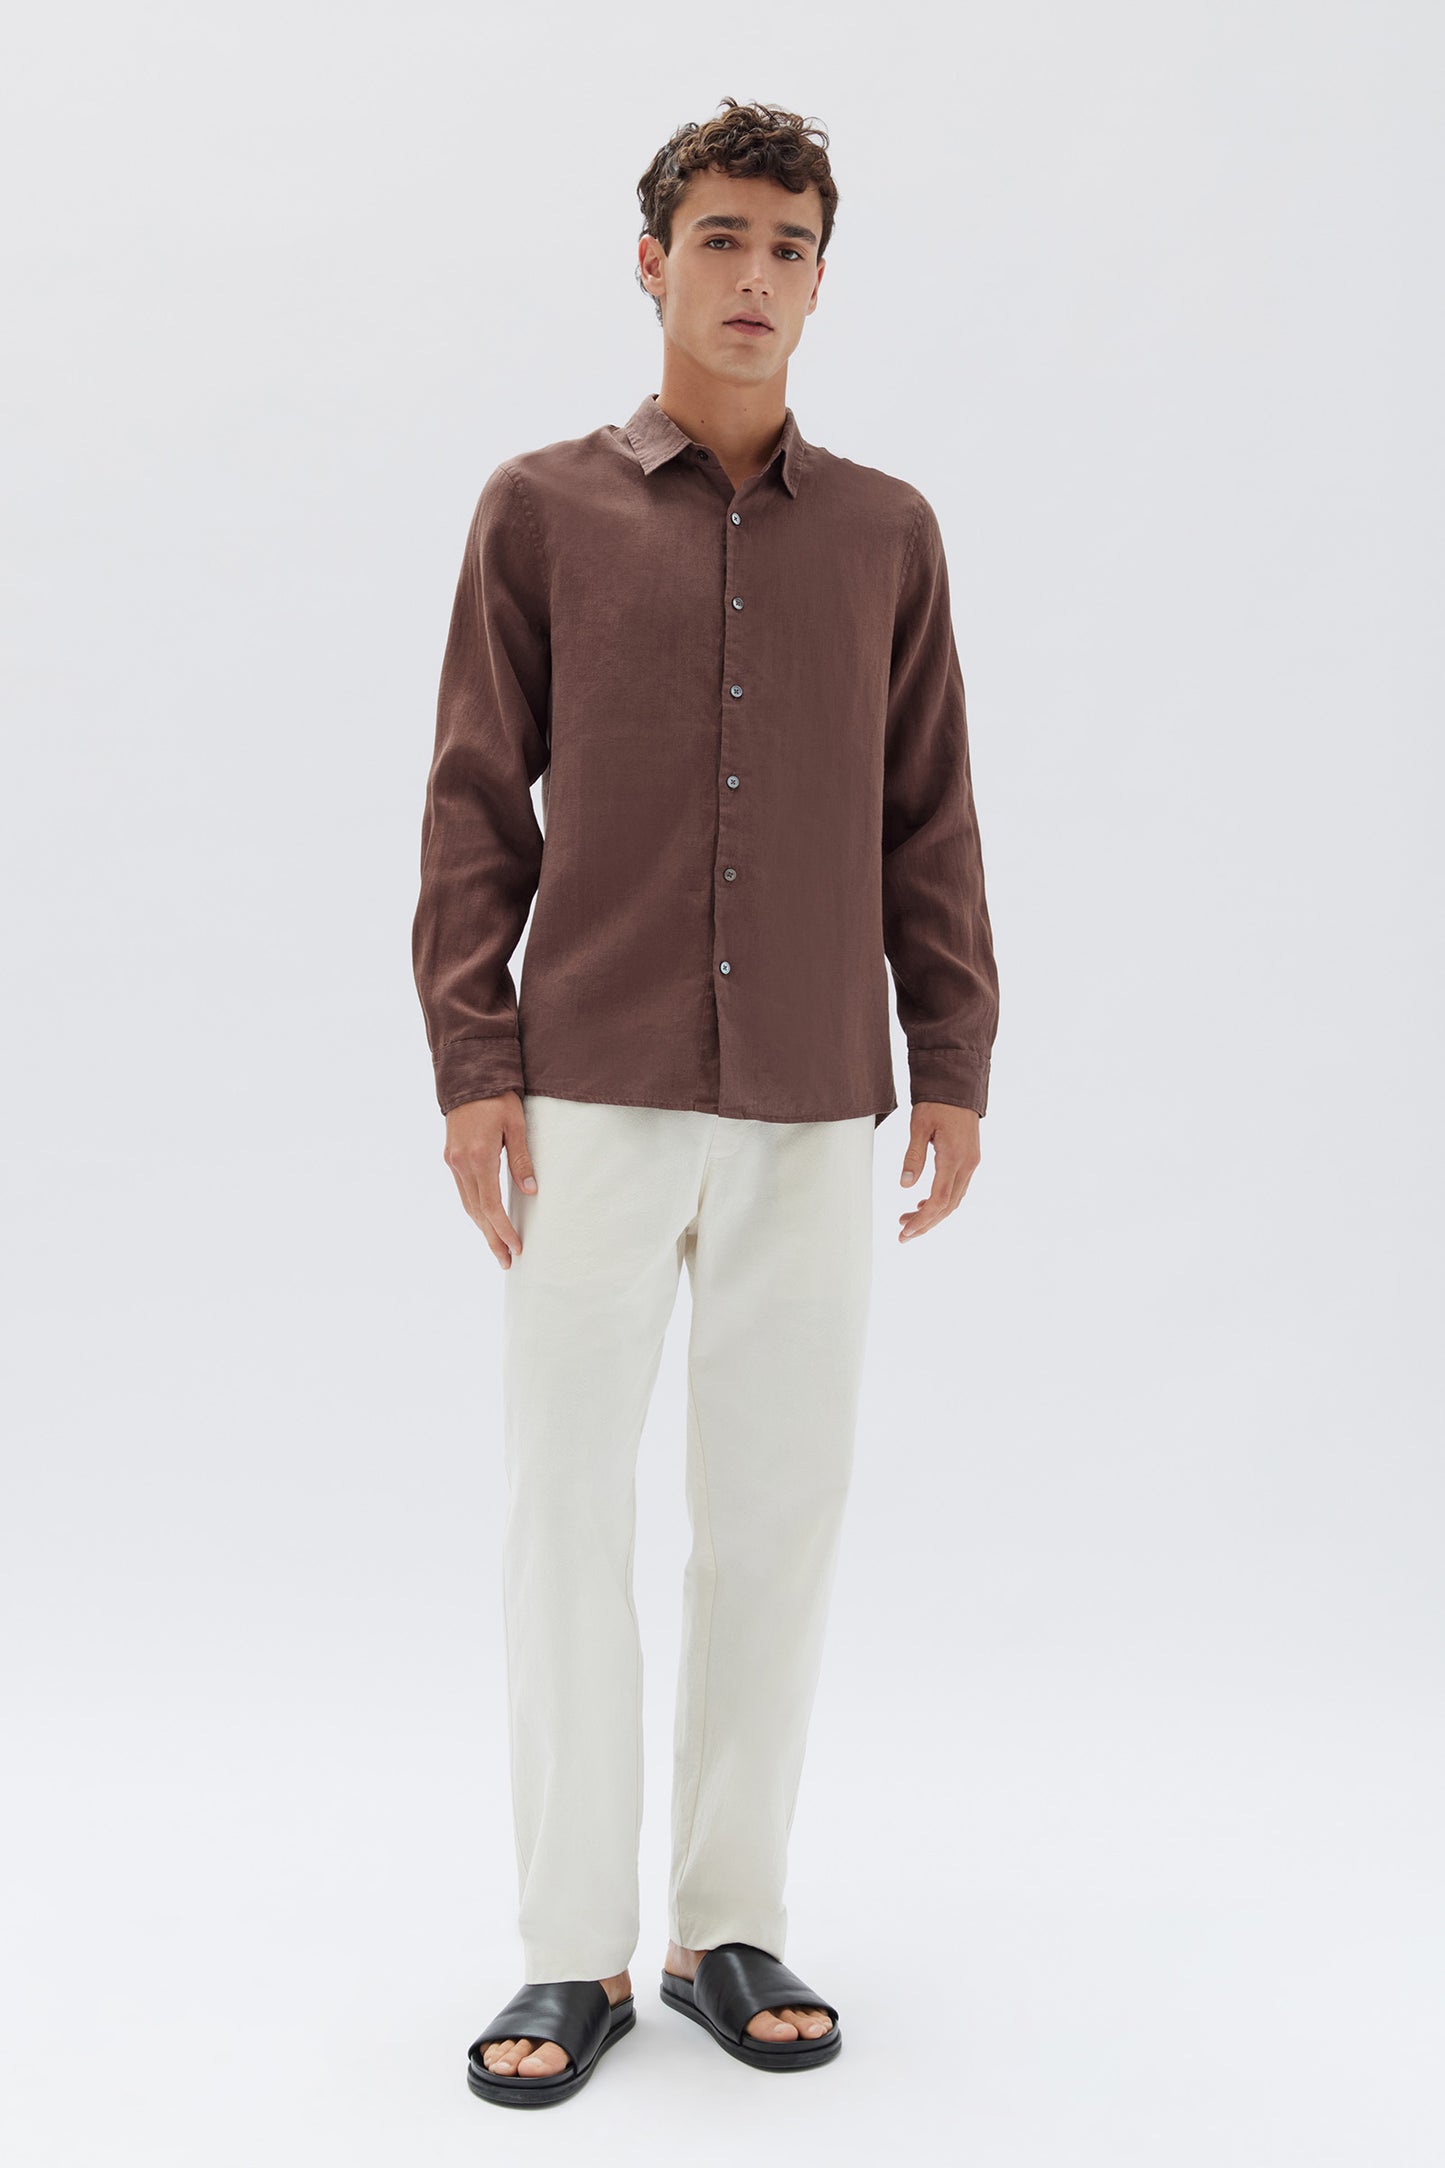 ASSEMBLY LABEL // Casual Long Sleeve Shirt CHESTNUT